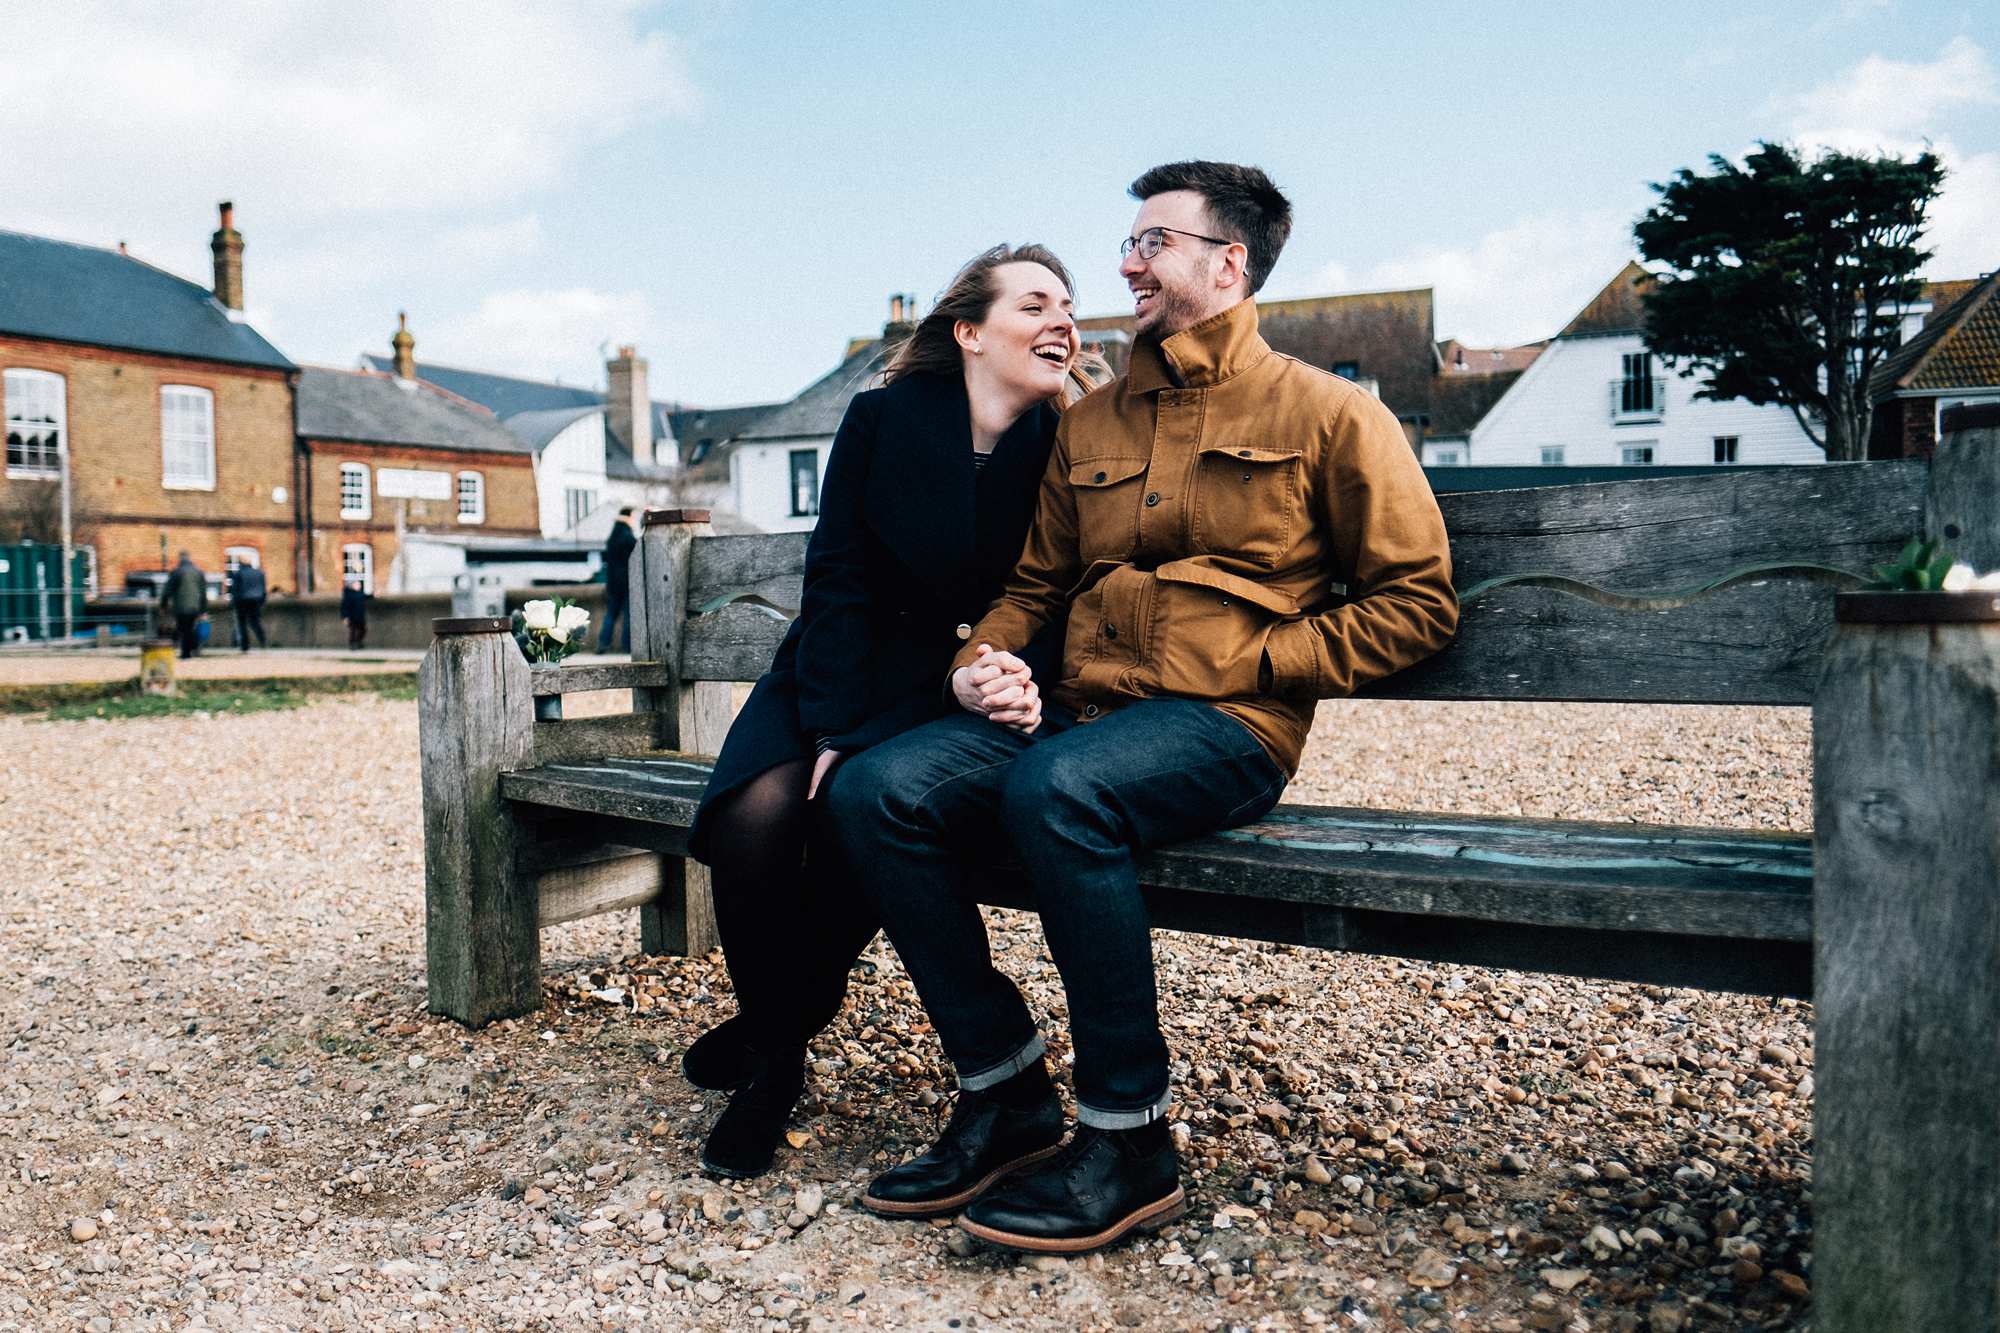 Creative and cool Whitstable engagemet shoot